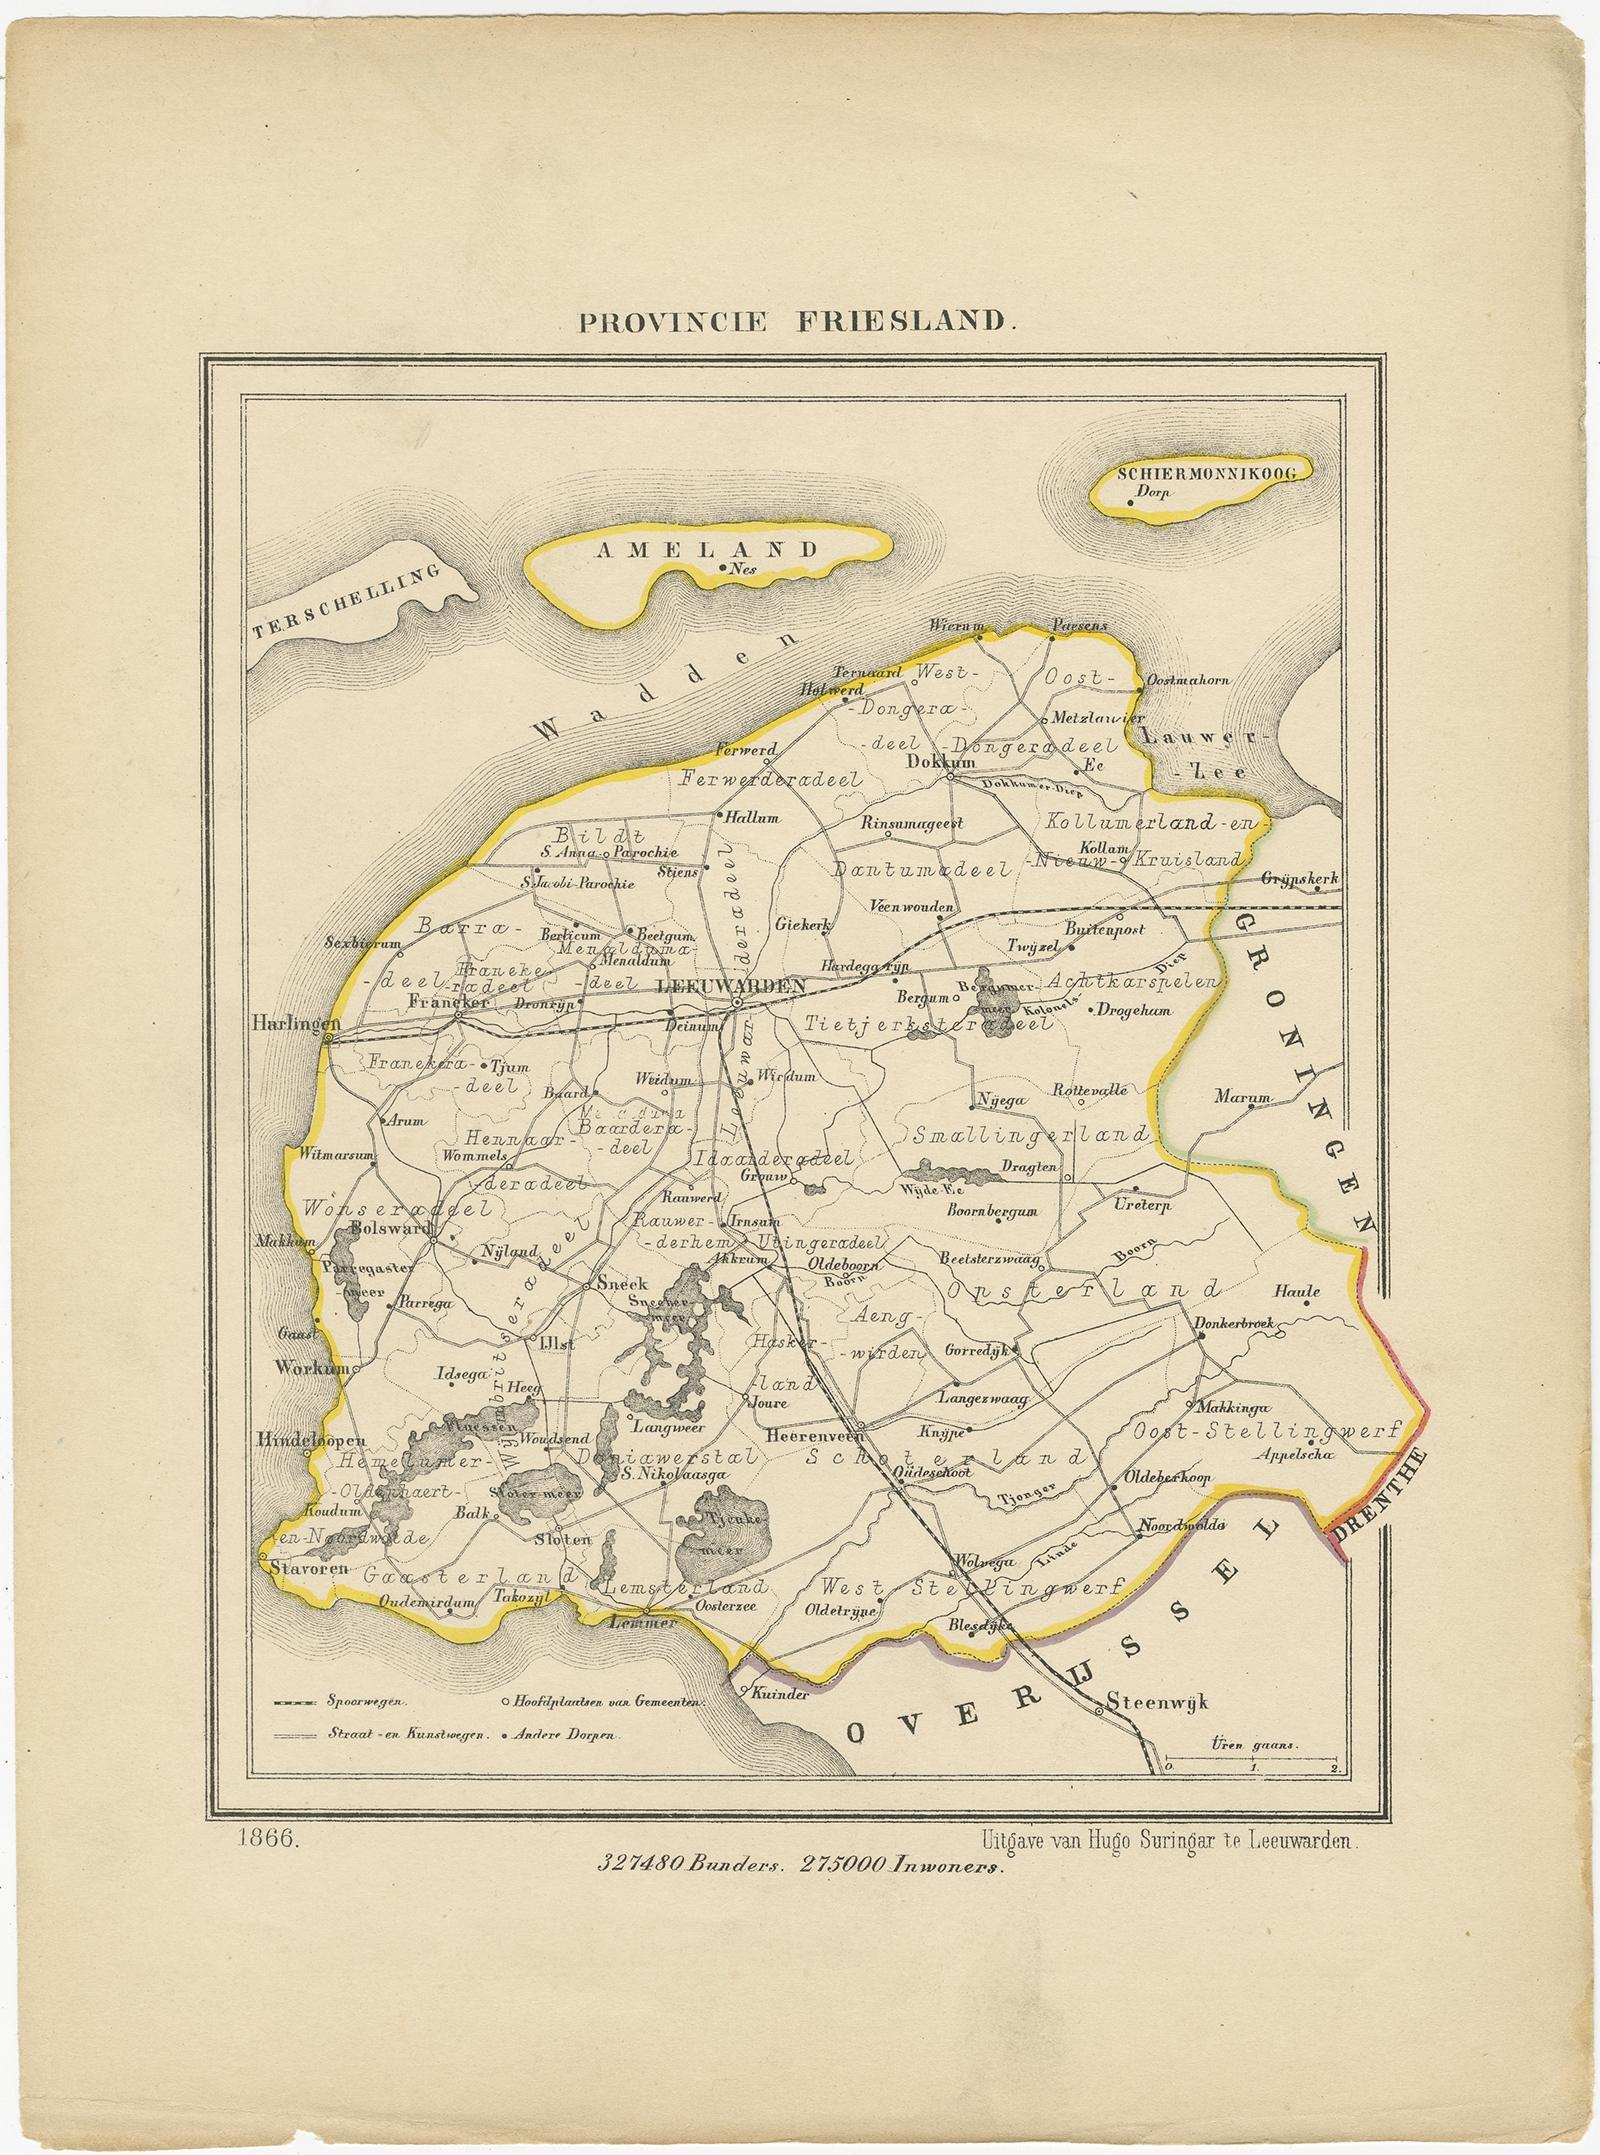 Antique map titled 'Provincie Friesland'.

 Map of Friesland, the Netherlands. This map originates from 'Gemeente-Atlas van Nederland' by J. Kuyper. 

Artists and Engravers: Published by H. Suringar. 

Condition: Good, general age-related